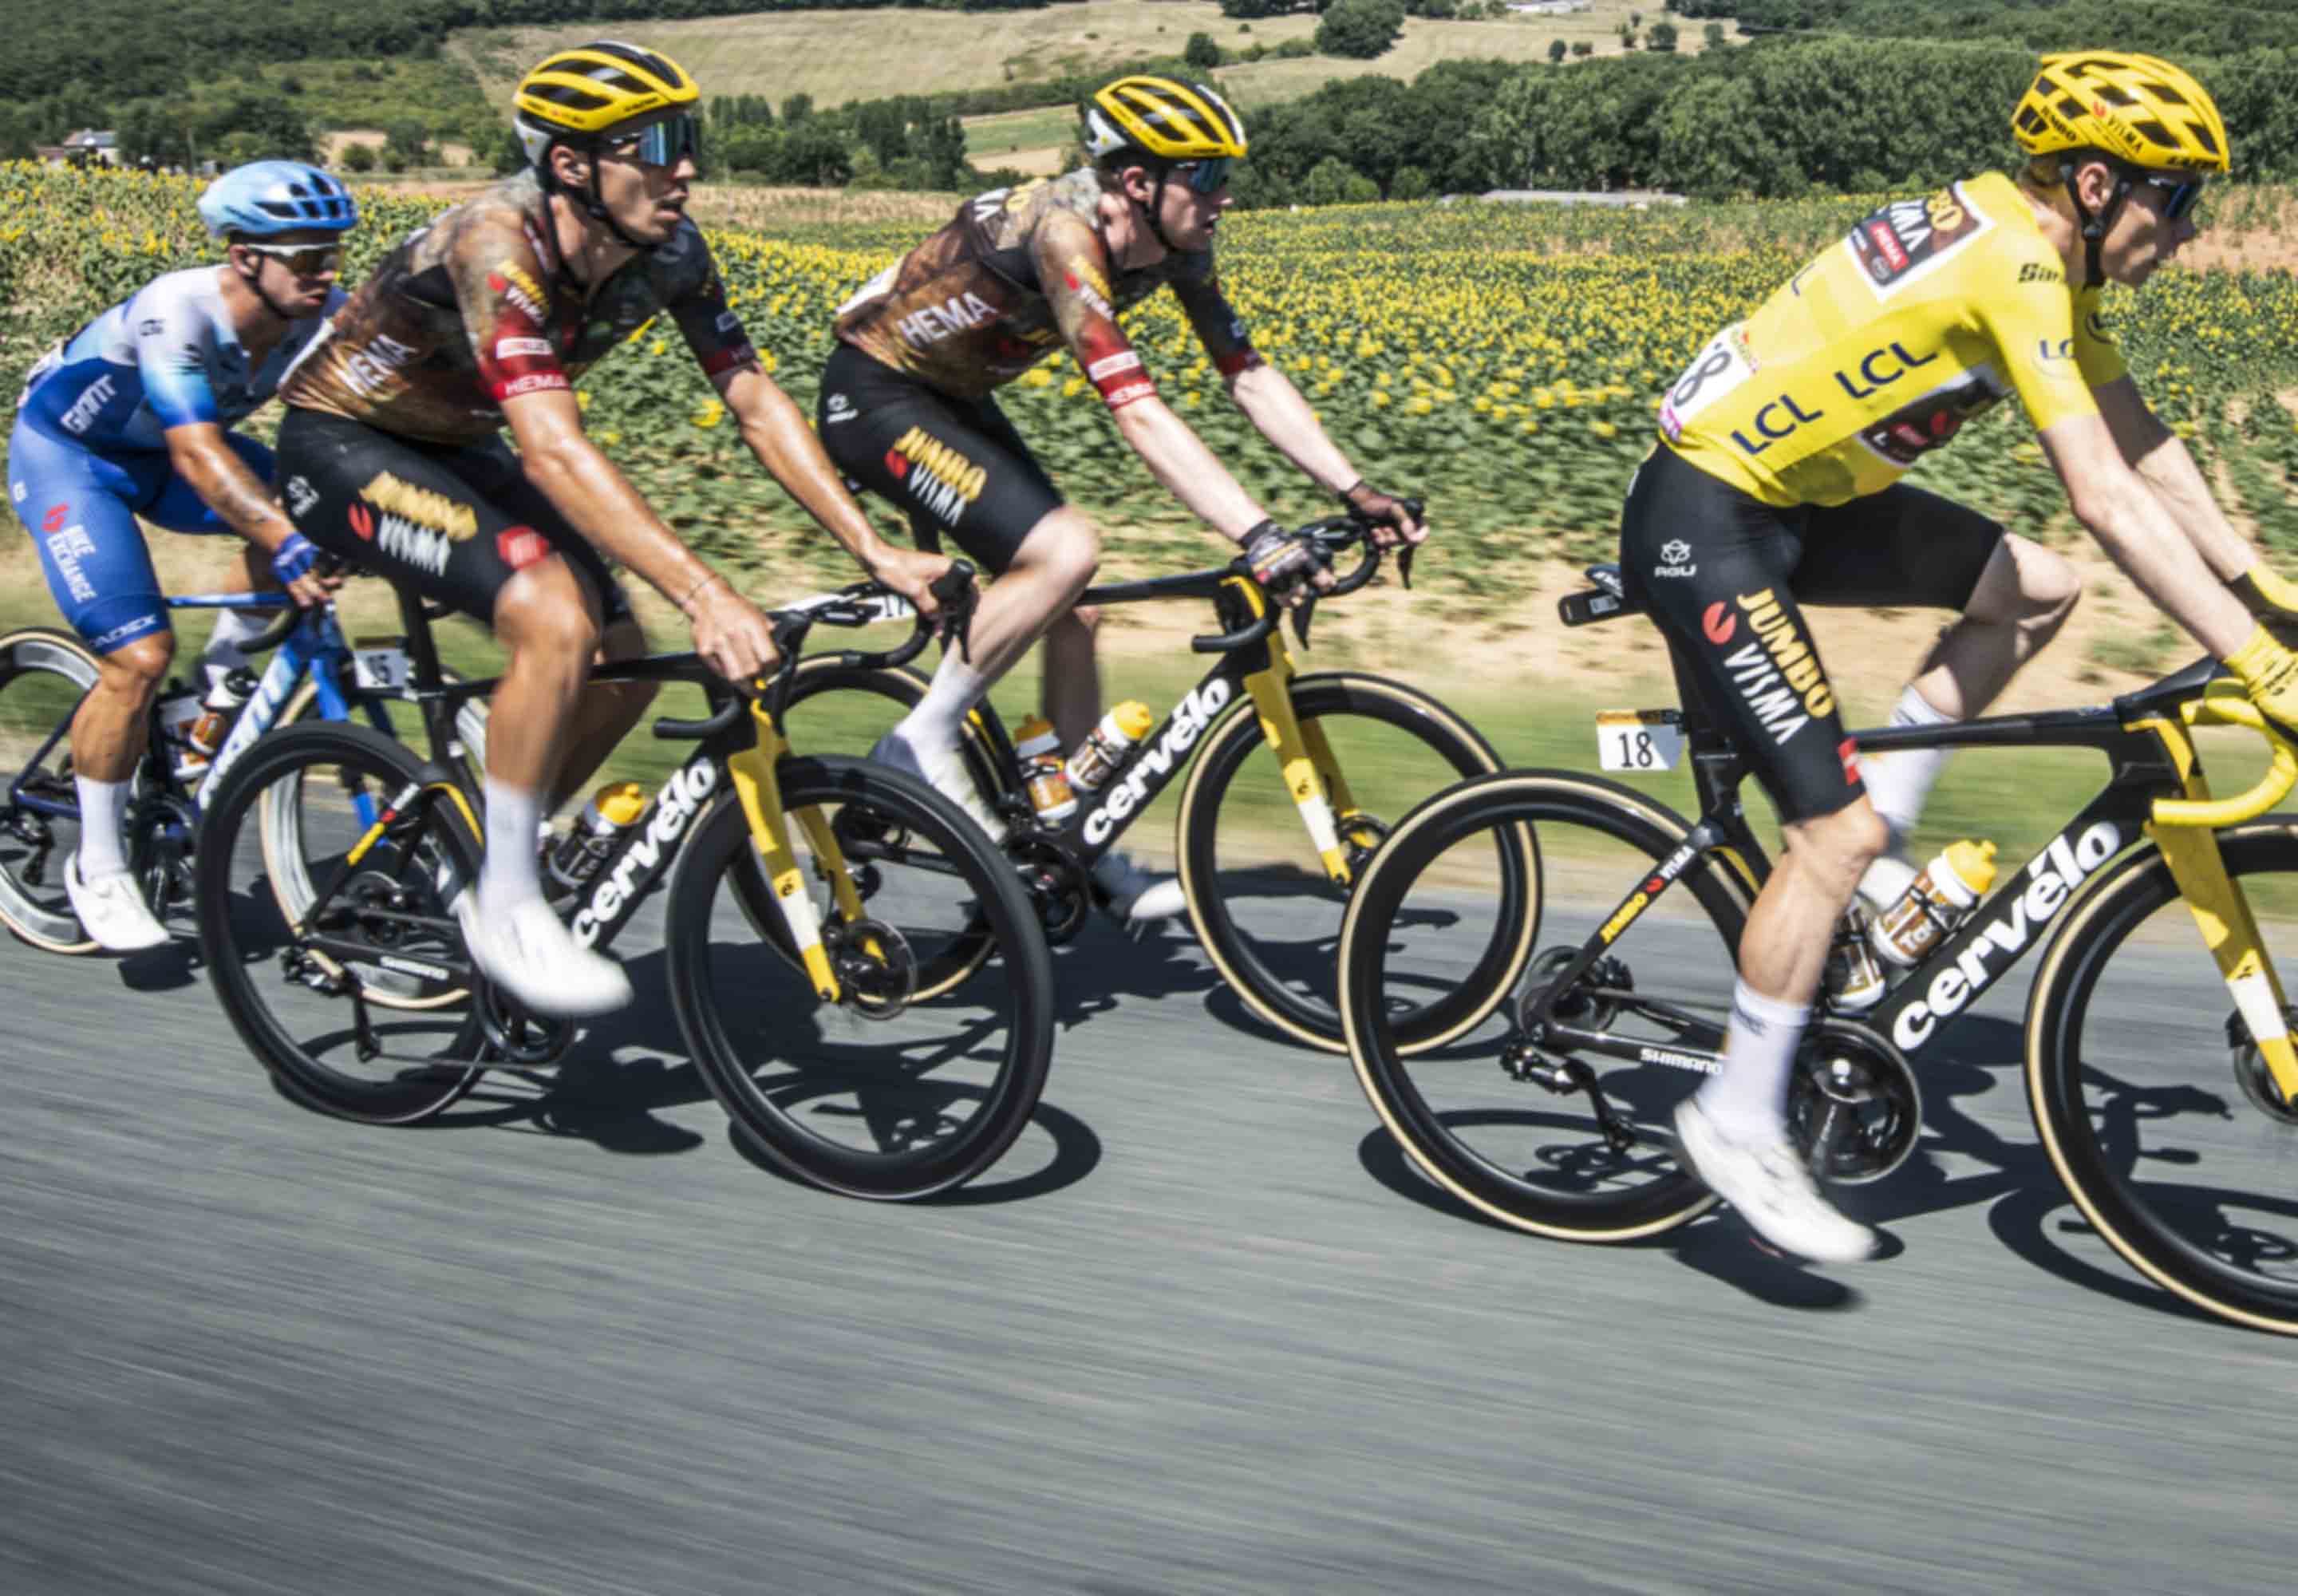 Dimension Data's data hub monitors and operates the Tour de France data system